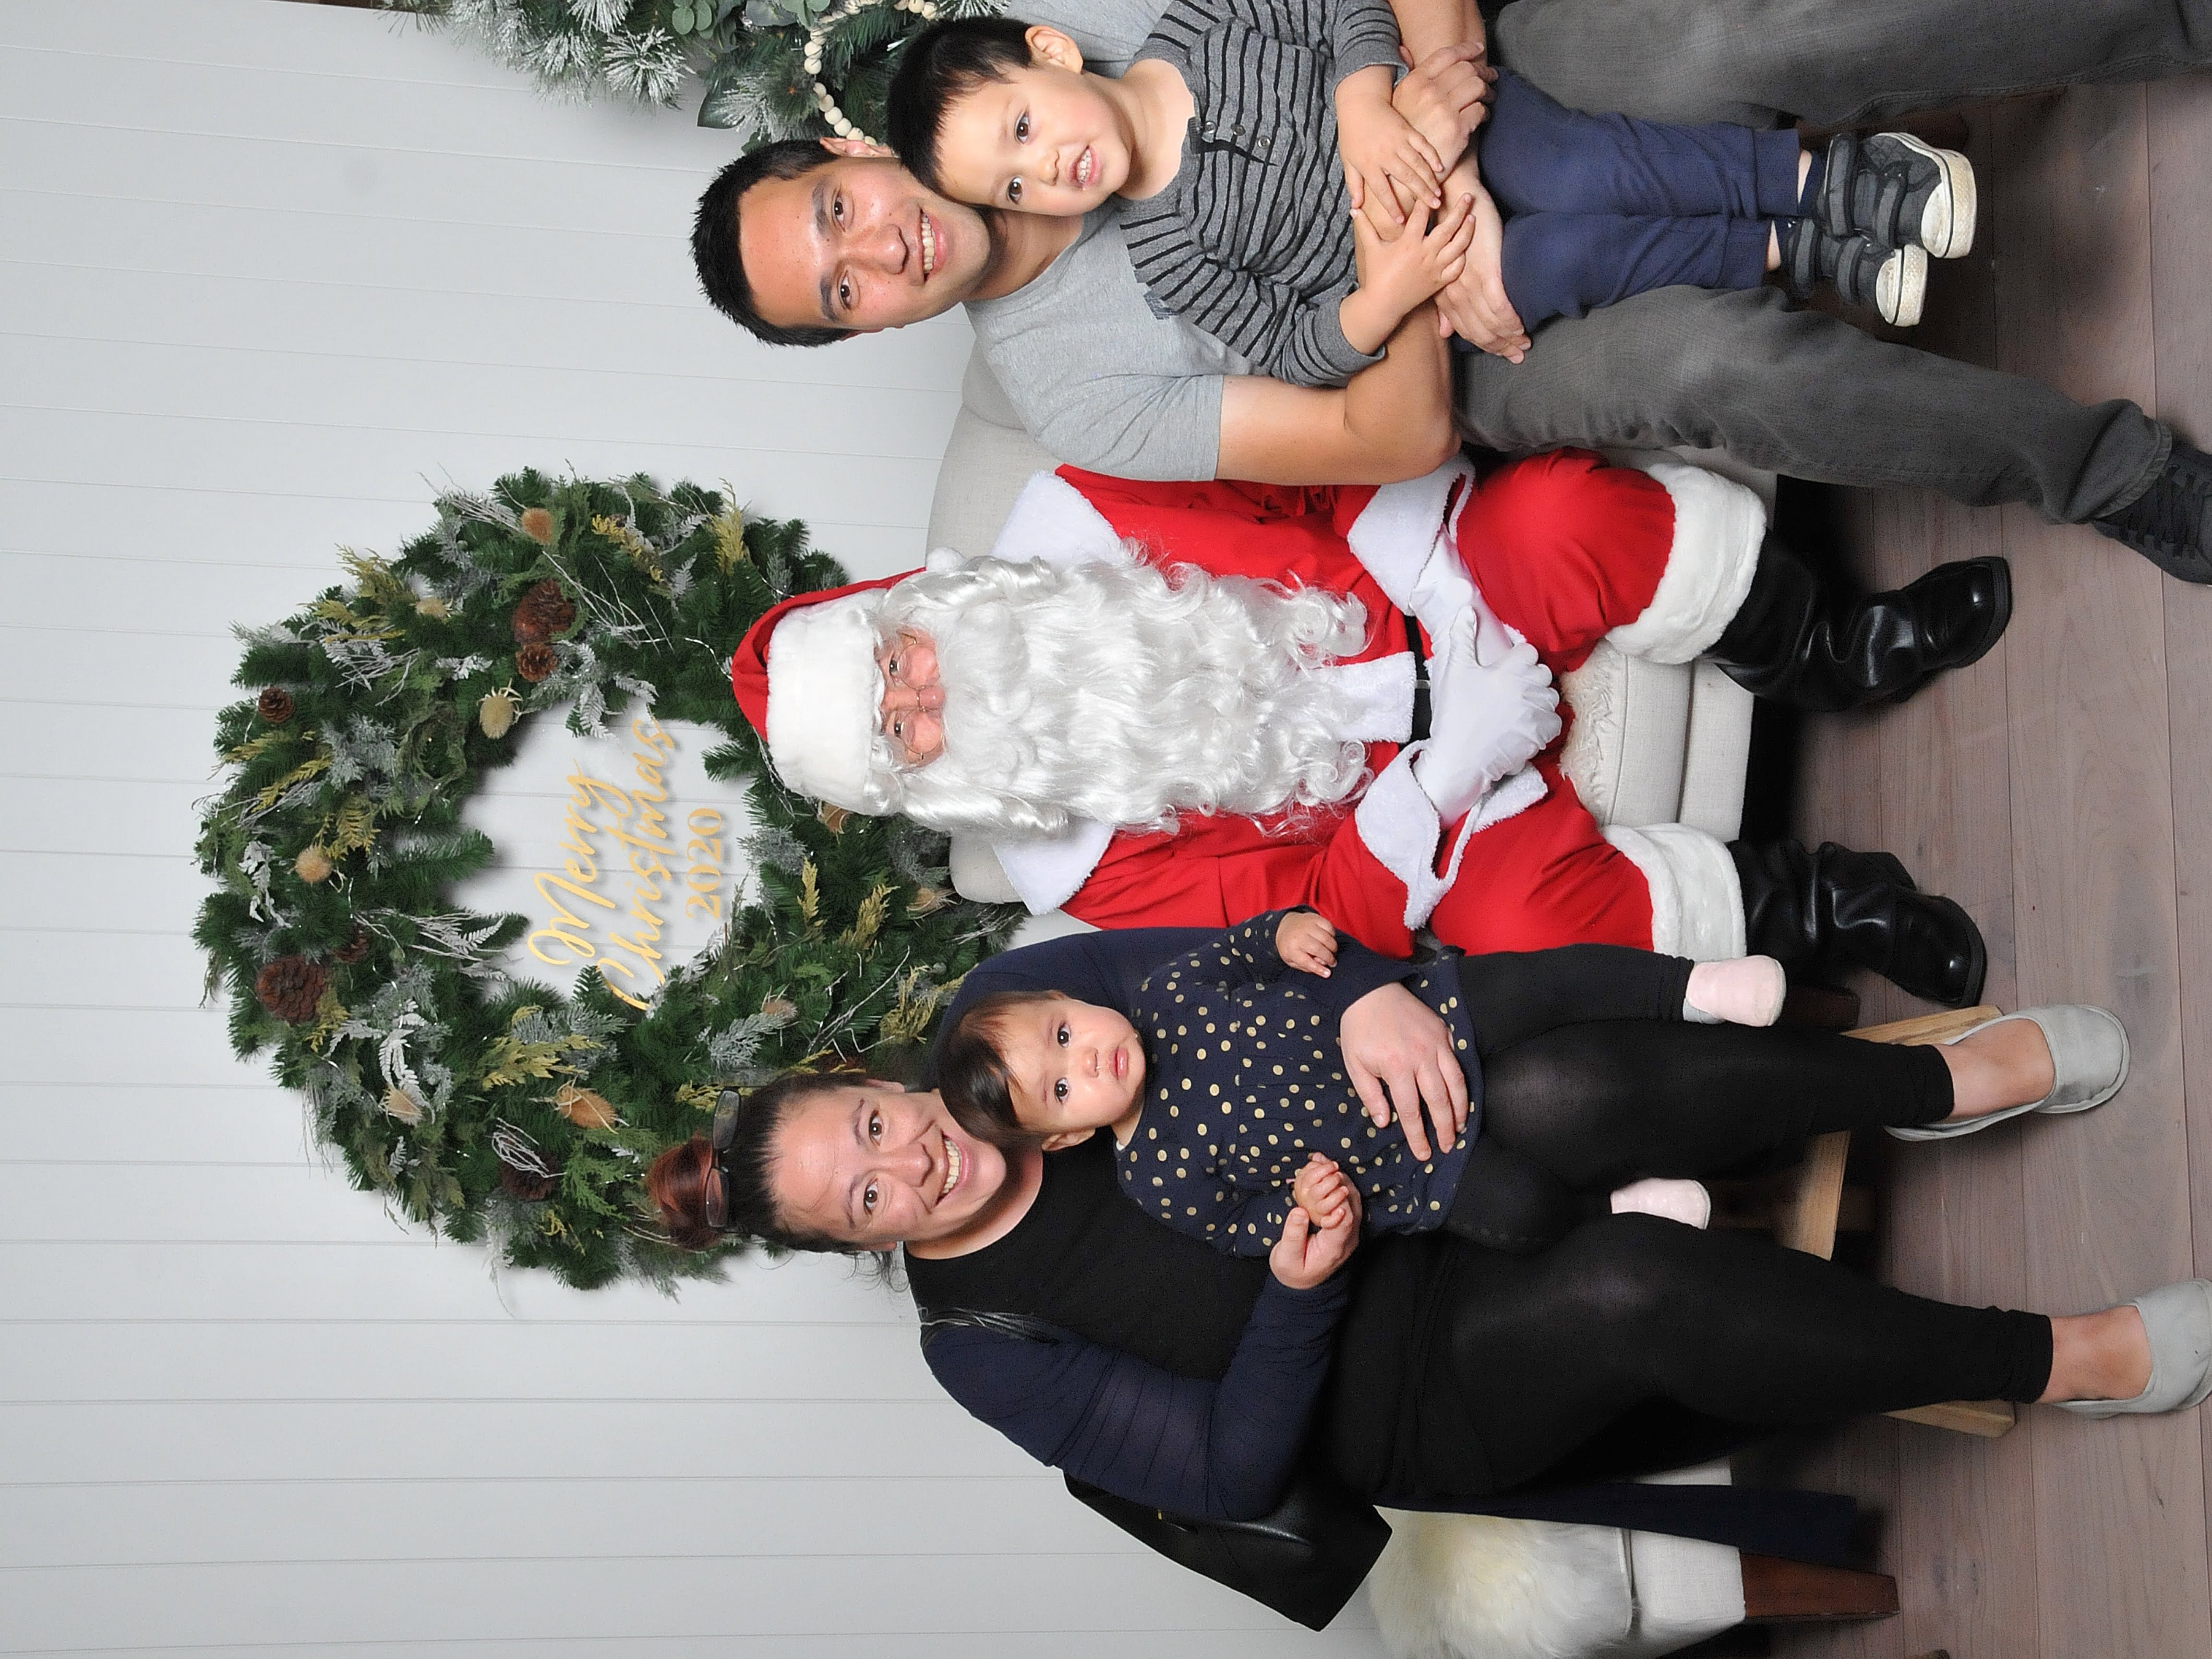 Santa is sat between a father holding his child on his lap and a mum with her little girl on her lap. All are smiling.